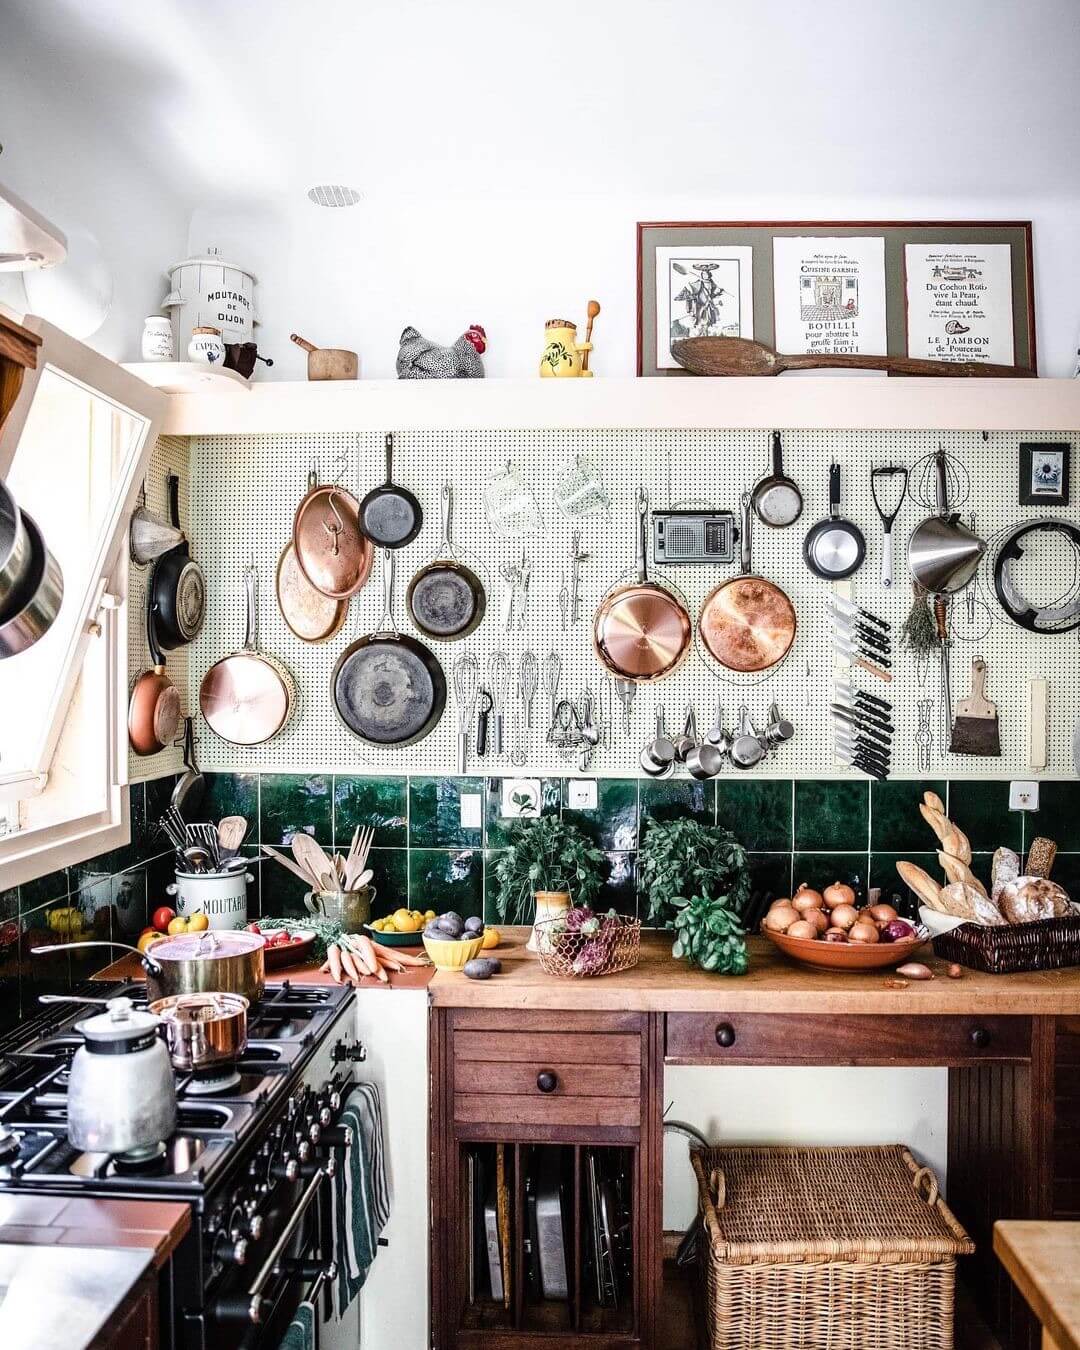 Quaint kitchen in french home, where cooking classes are offered. There are copper pots and iron skillets hanging on the walls above a green tiled backsplash and rustic wooden countertops.